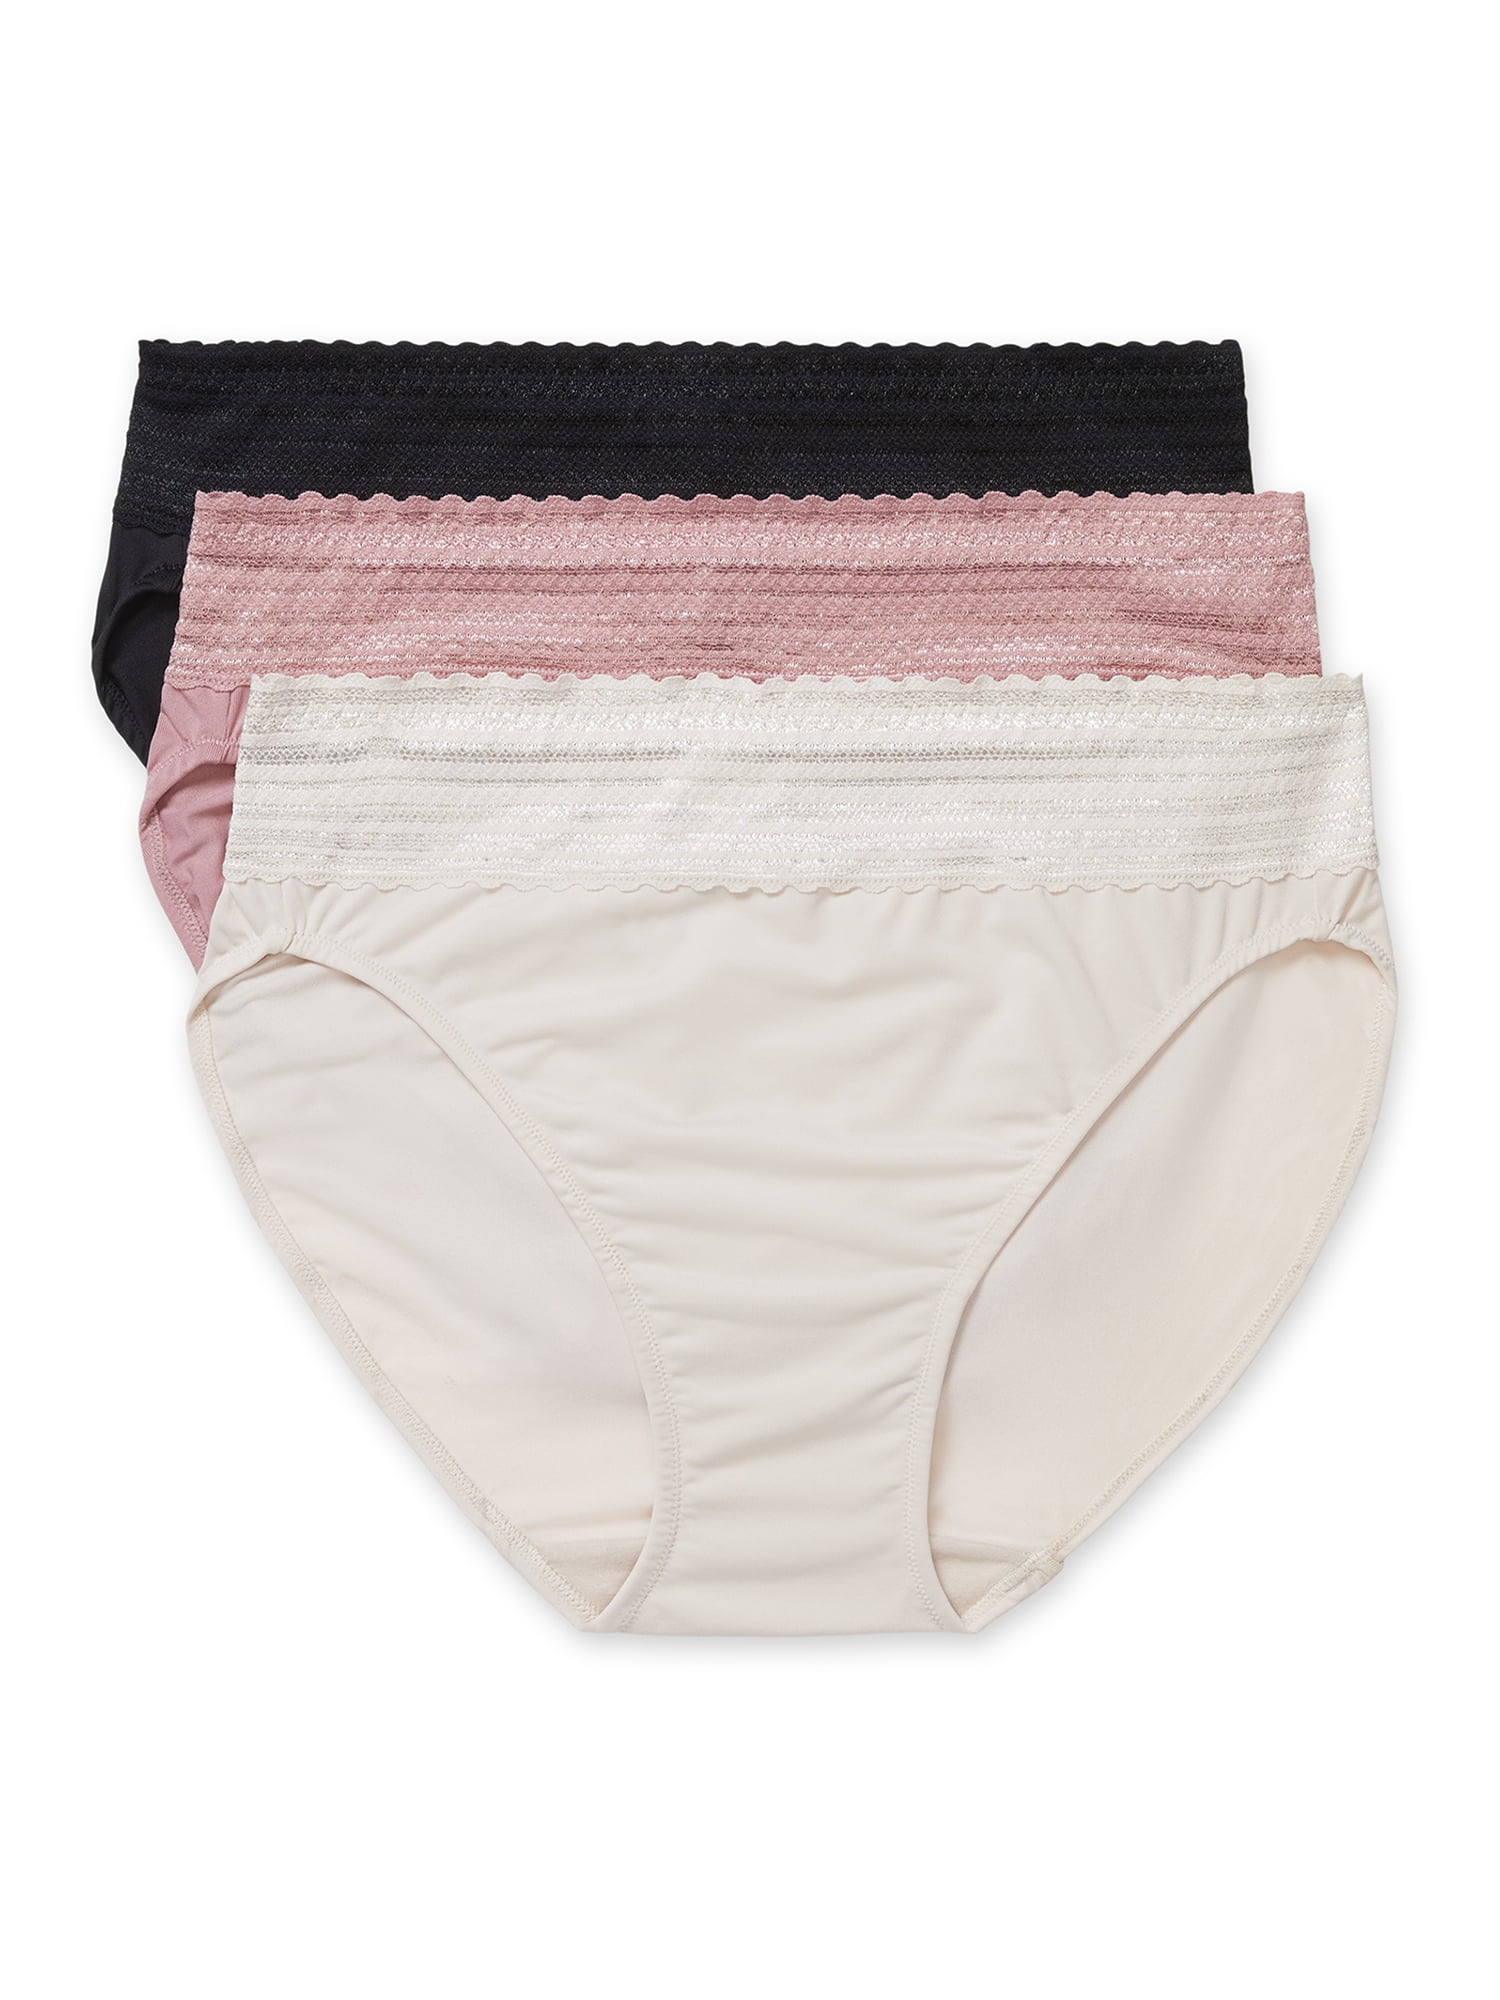 Warners® Blissful Benefits Dig-Free Comfort Waistband with Lace Microfiber  Hi-Cut 3-Pack 5109W